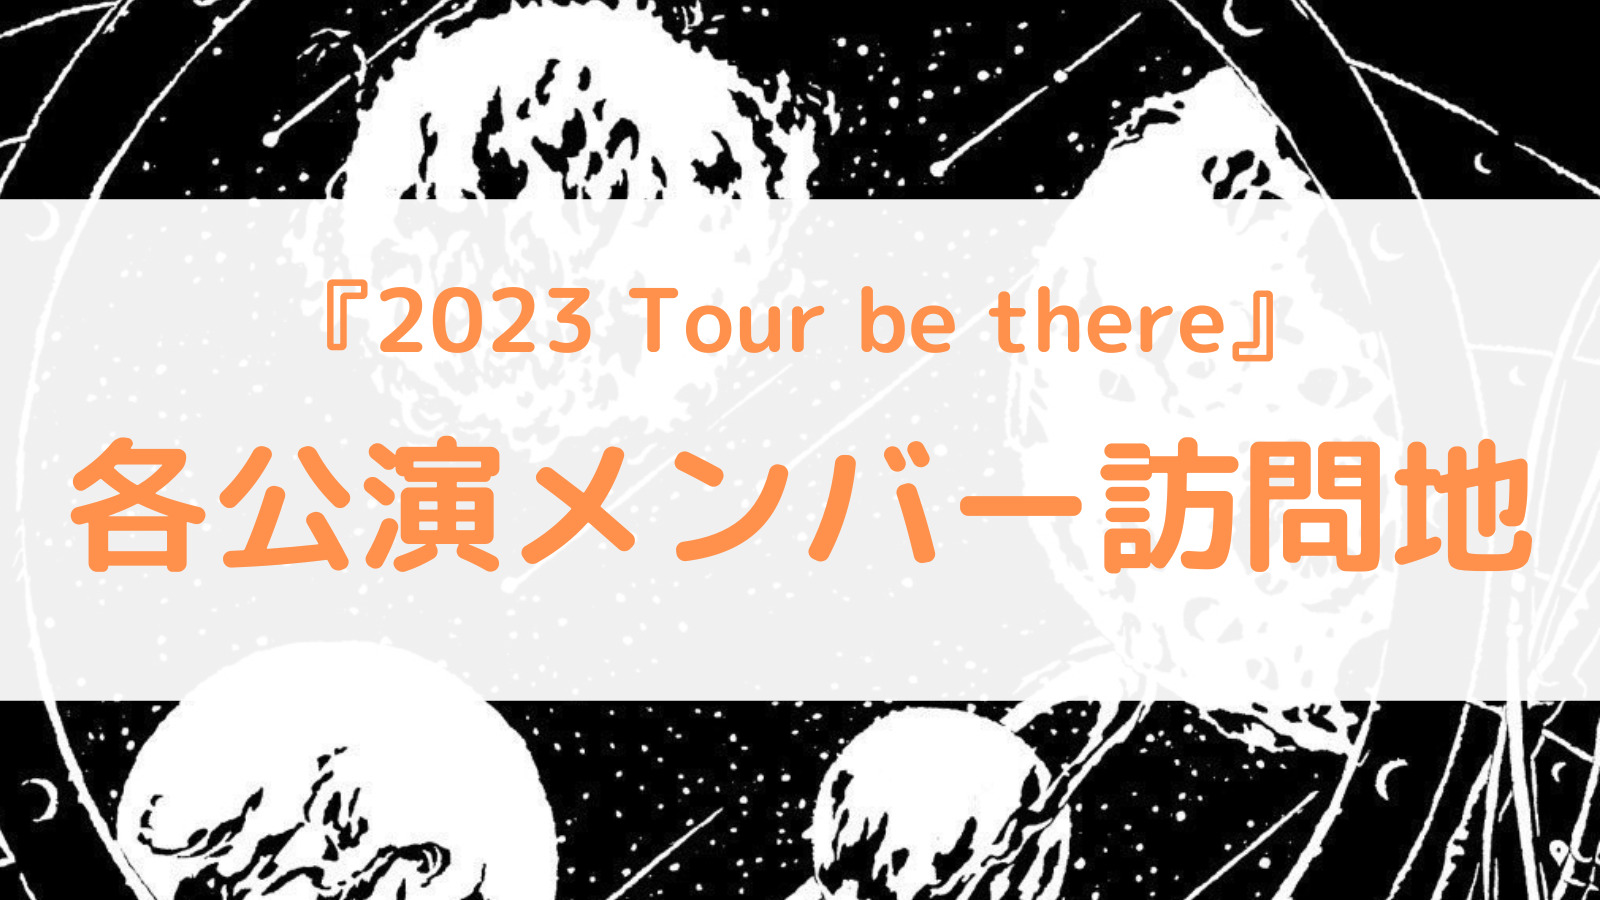 BUMP OF CHICKEN 2023 Tour be there』メンバー訪問スポット ごはん